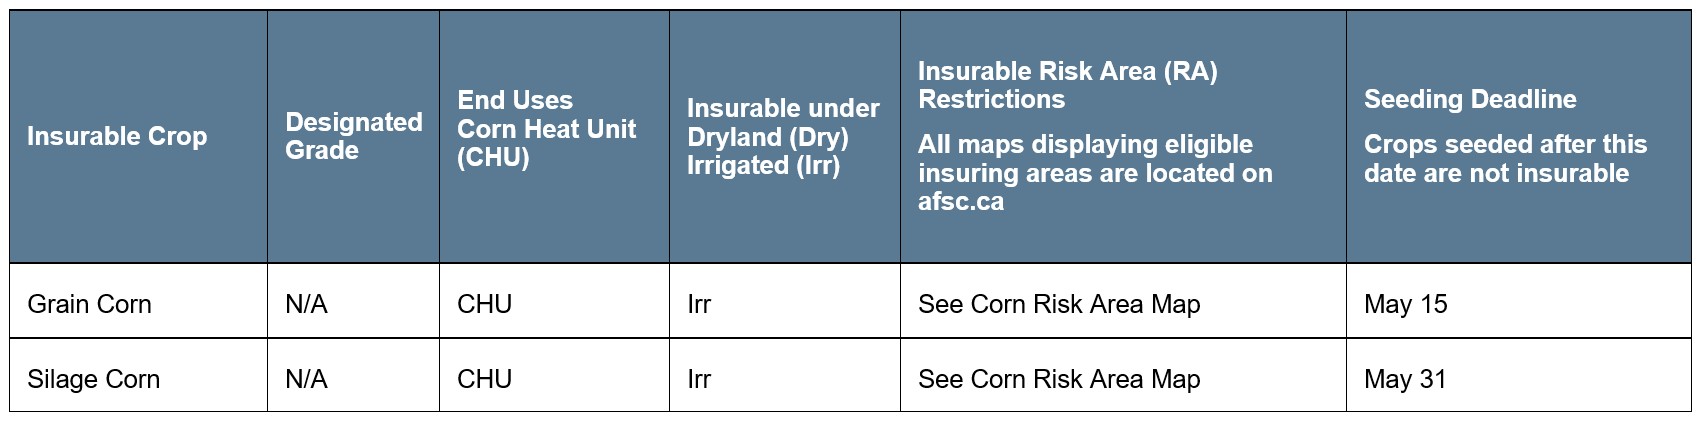 Corn Heat Units Article 2 Specifications. Call AFSC for details